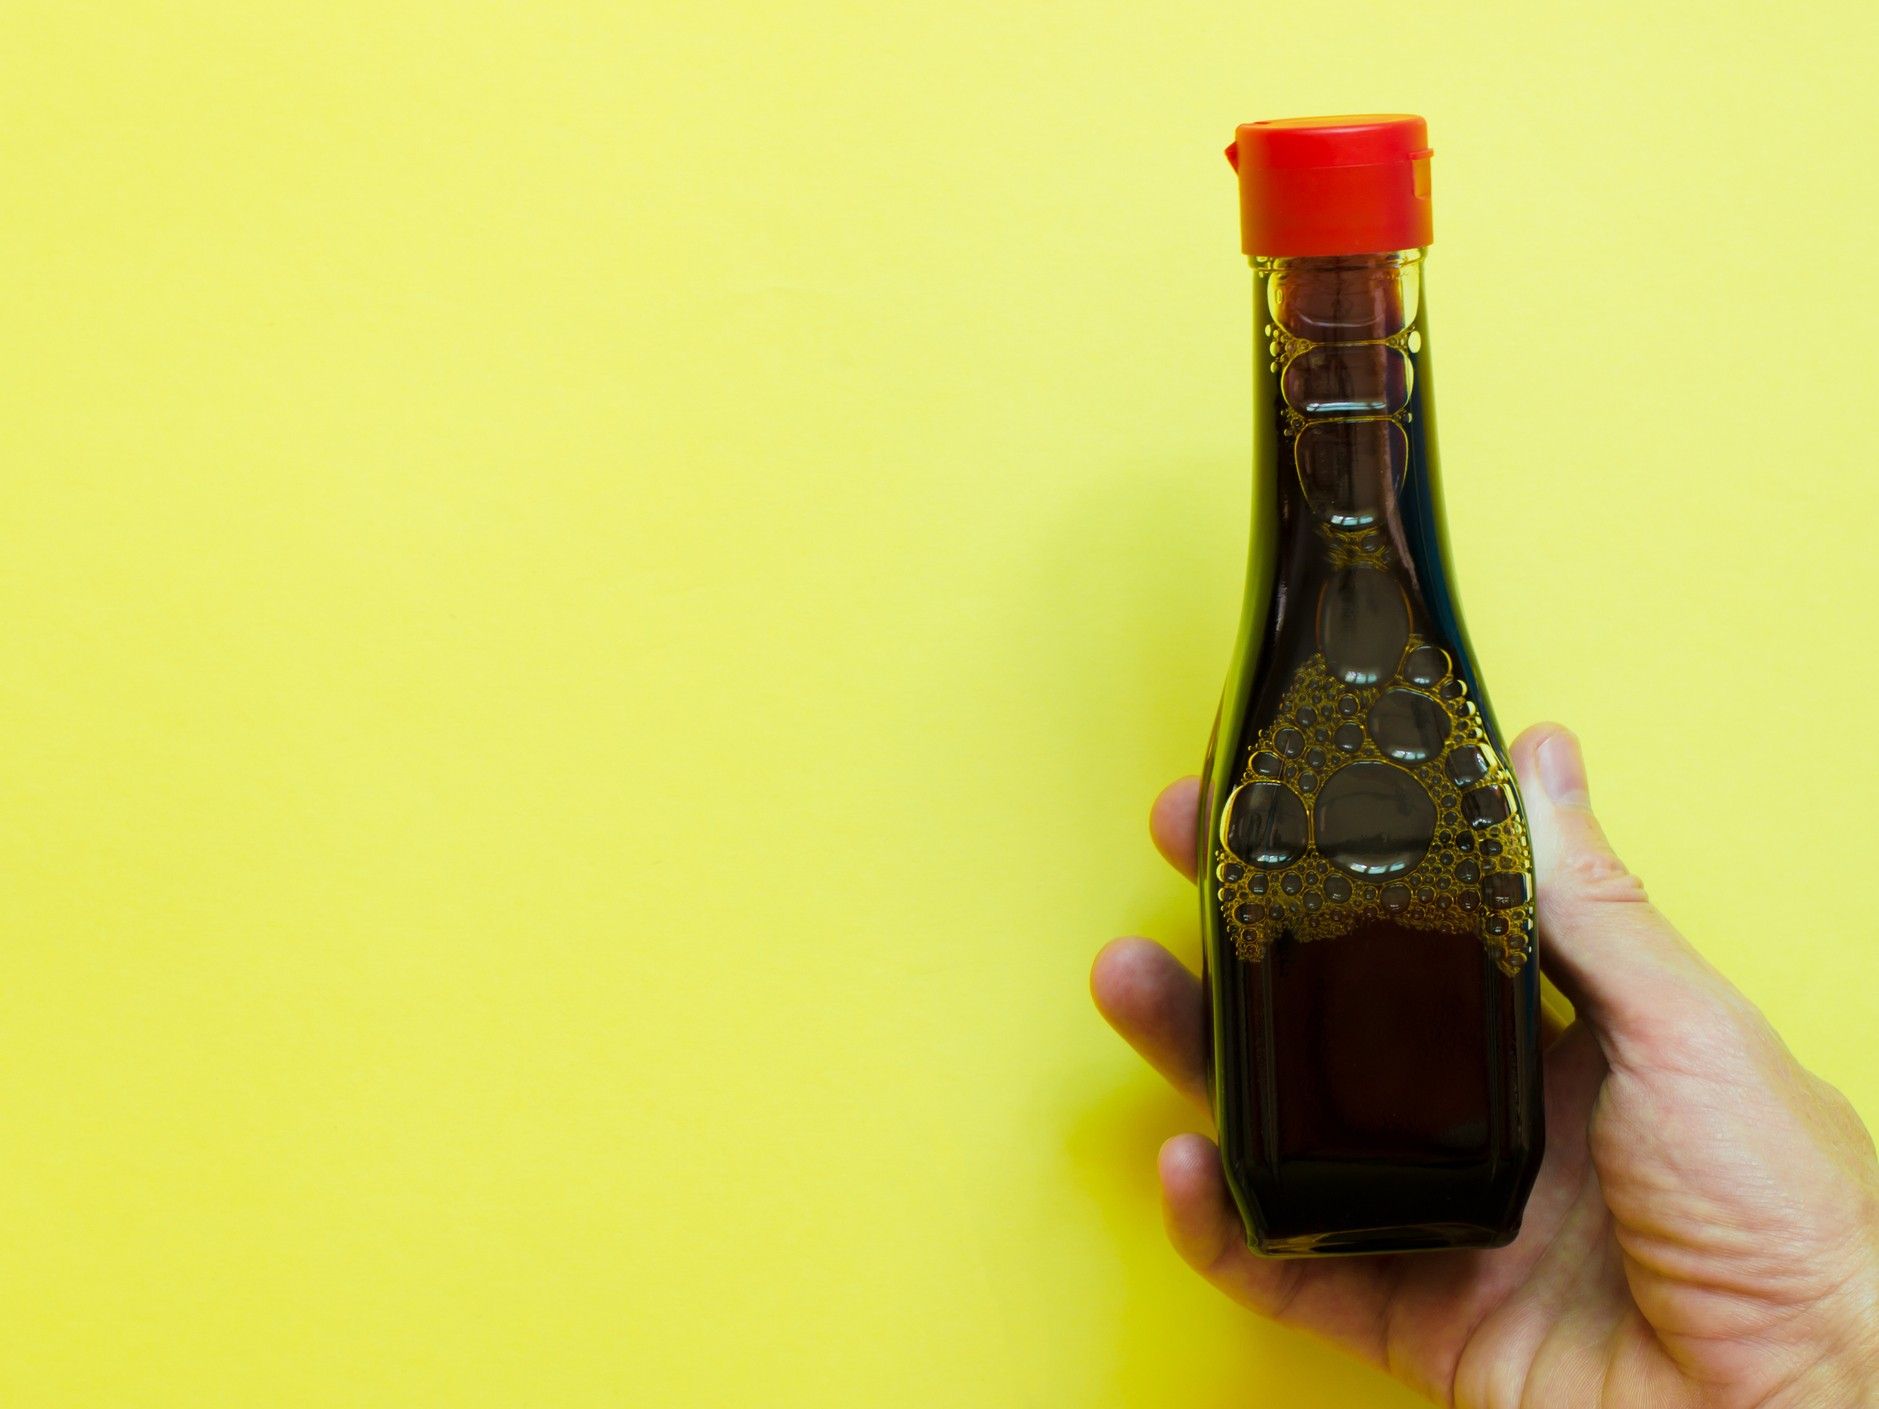 There's such a thing as too much soy sauce.